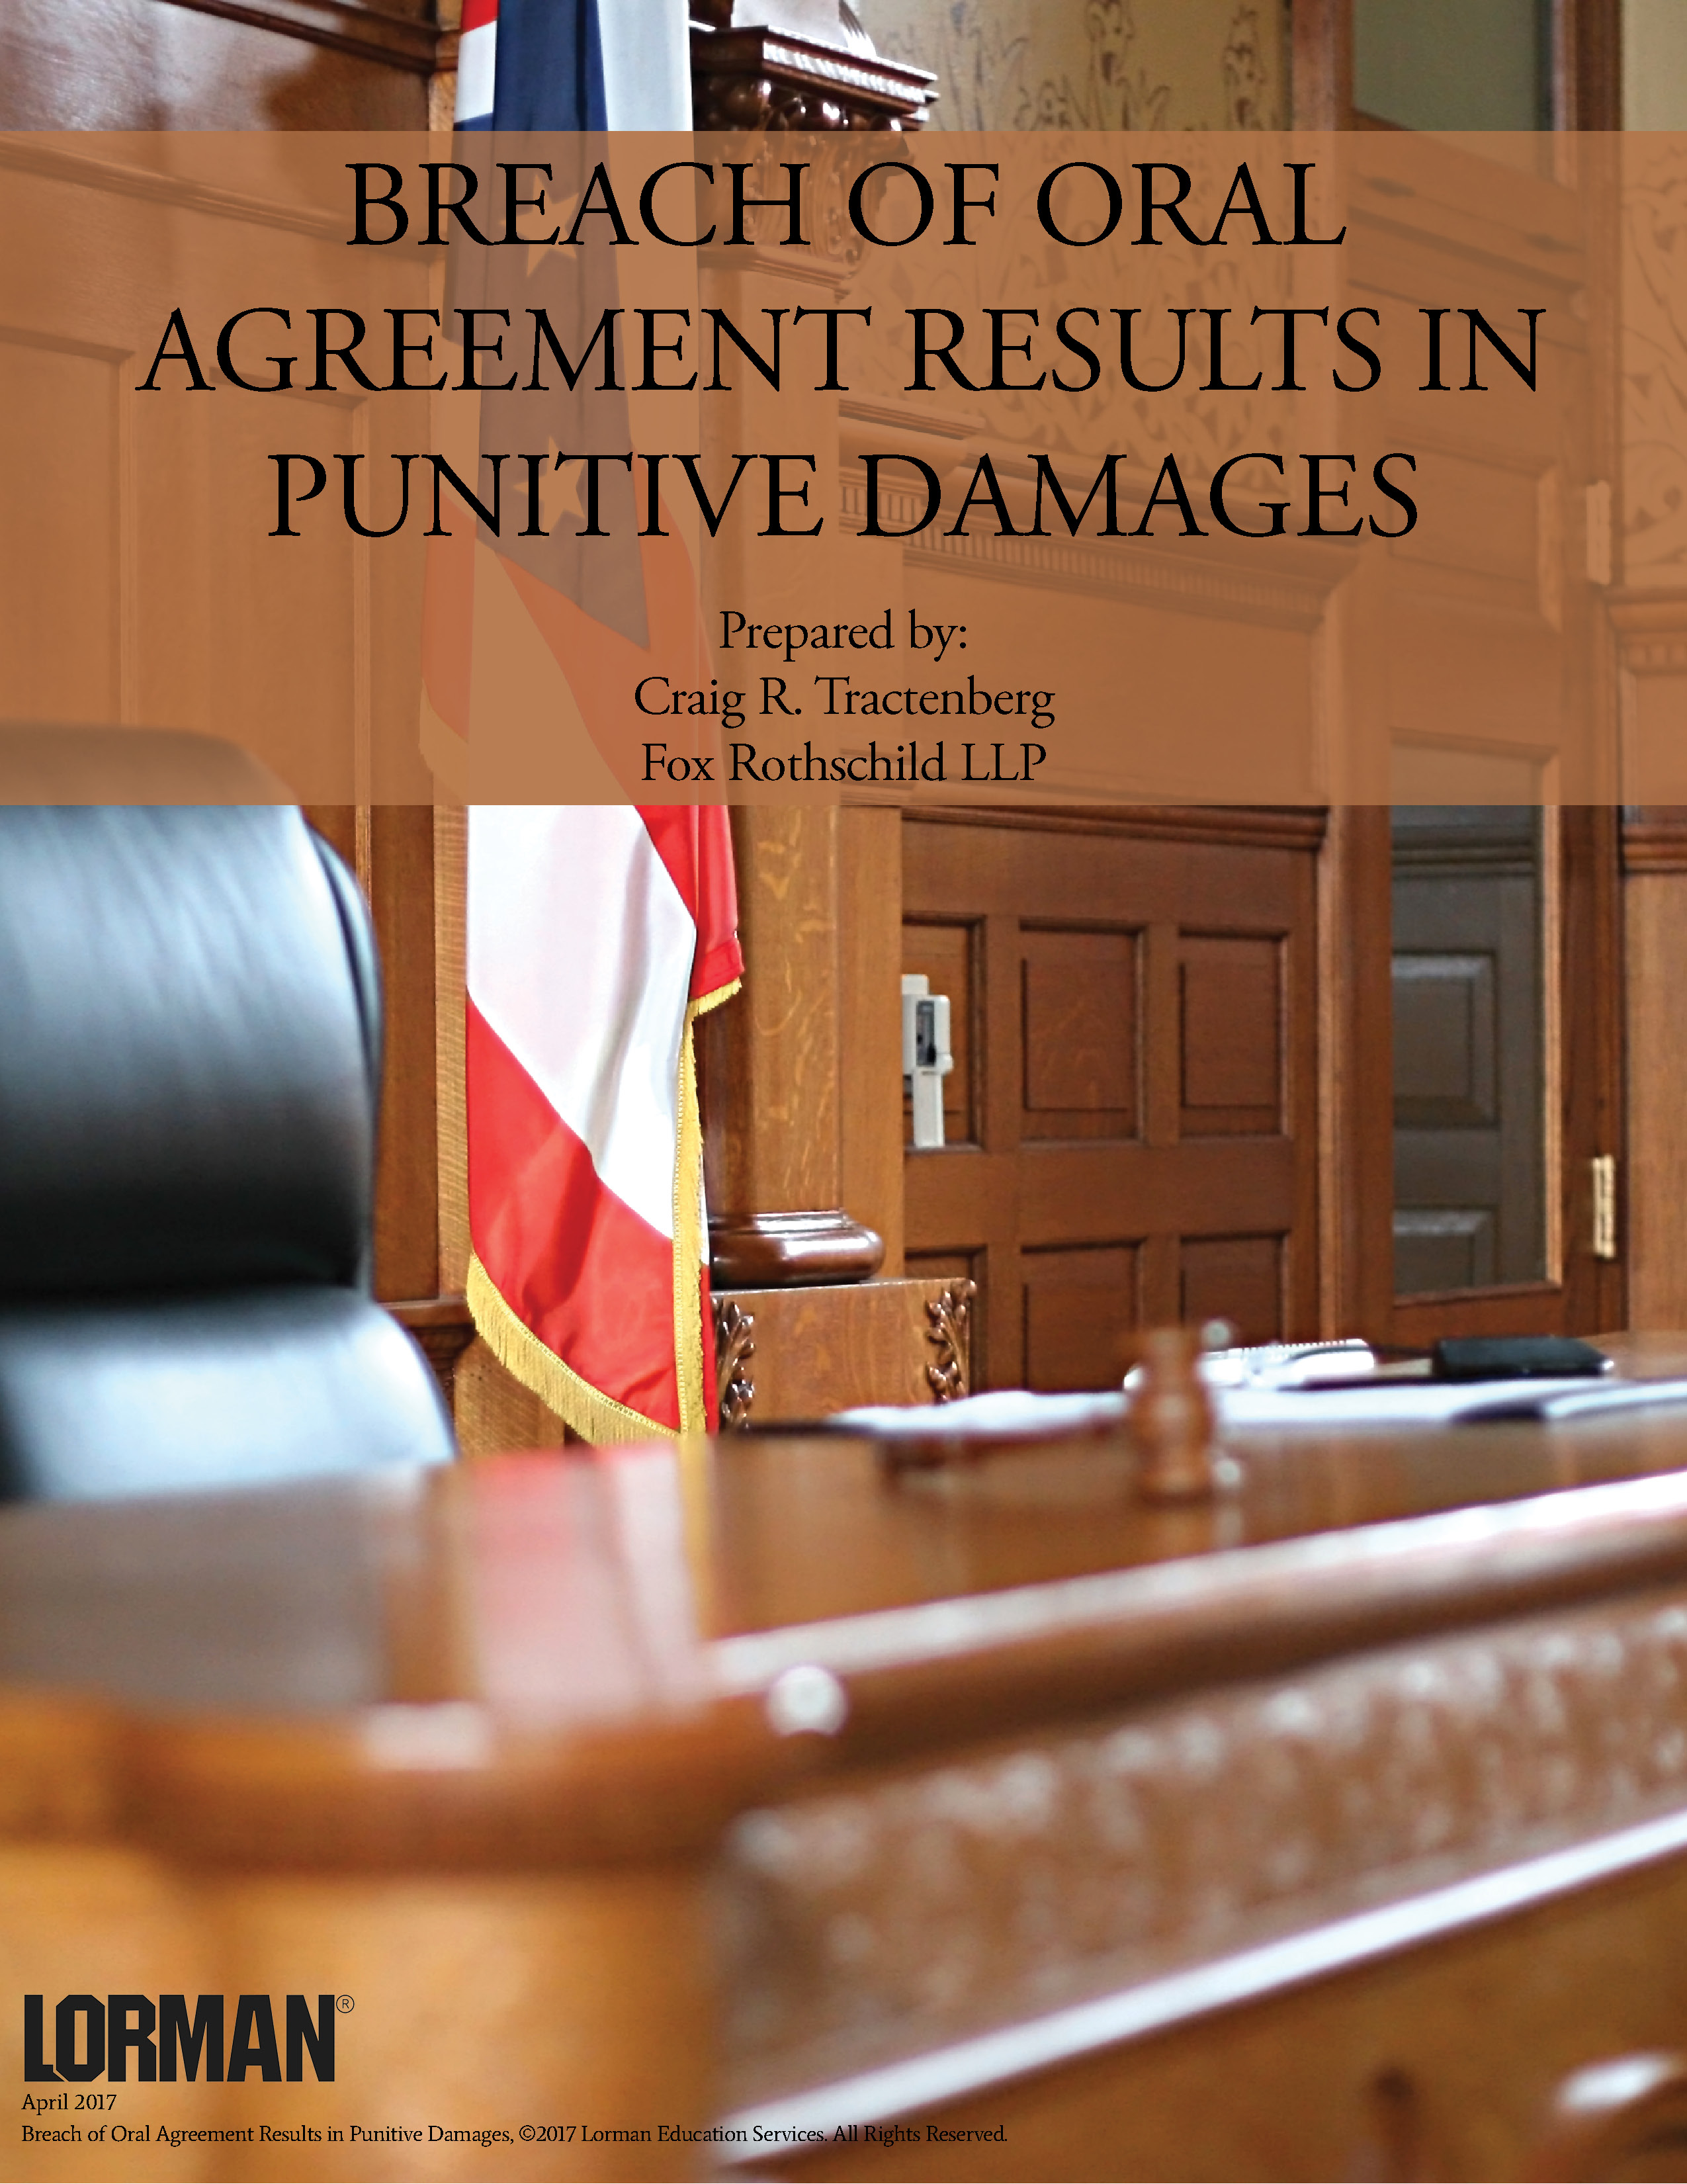 Breach of Oral Agreement Results in Punitive Damages